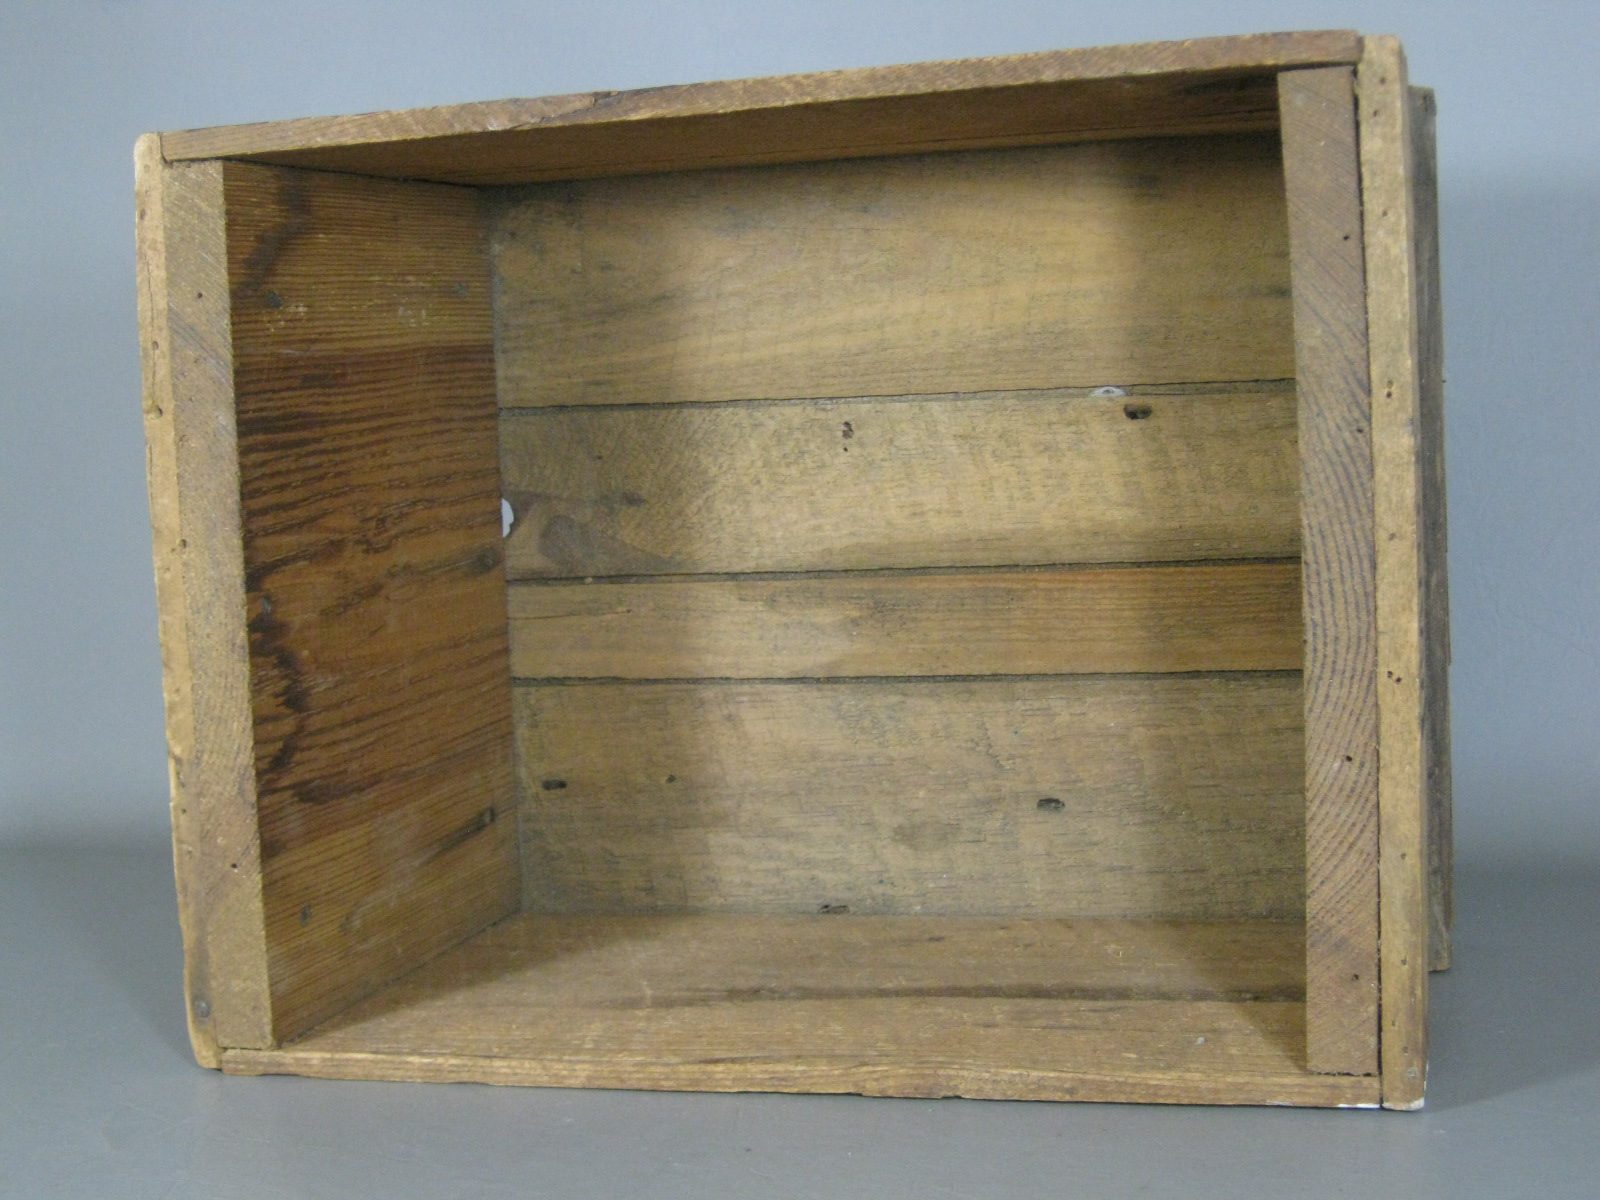 Antique 1800s Cramer Dry Plate Photo Negatives Wood Wooden Crate Box St. Louis 5